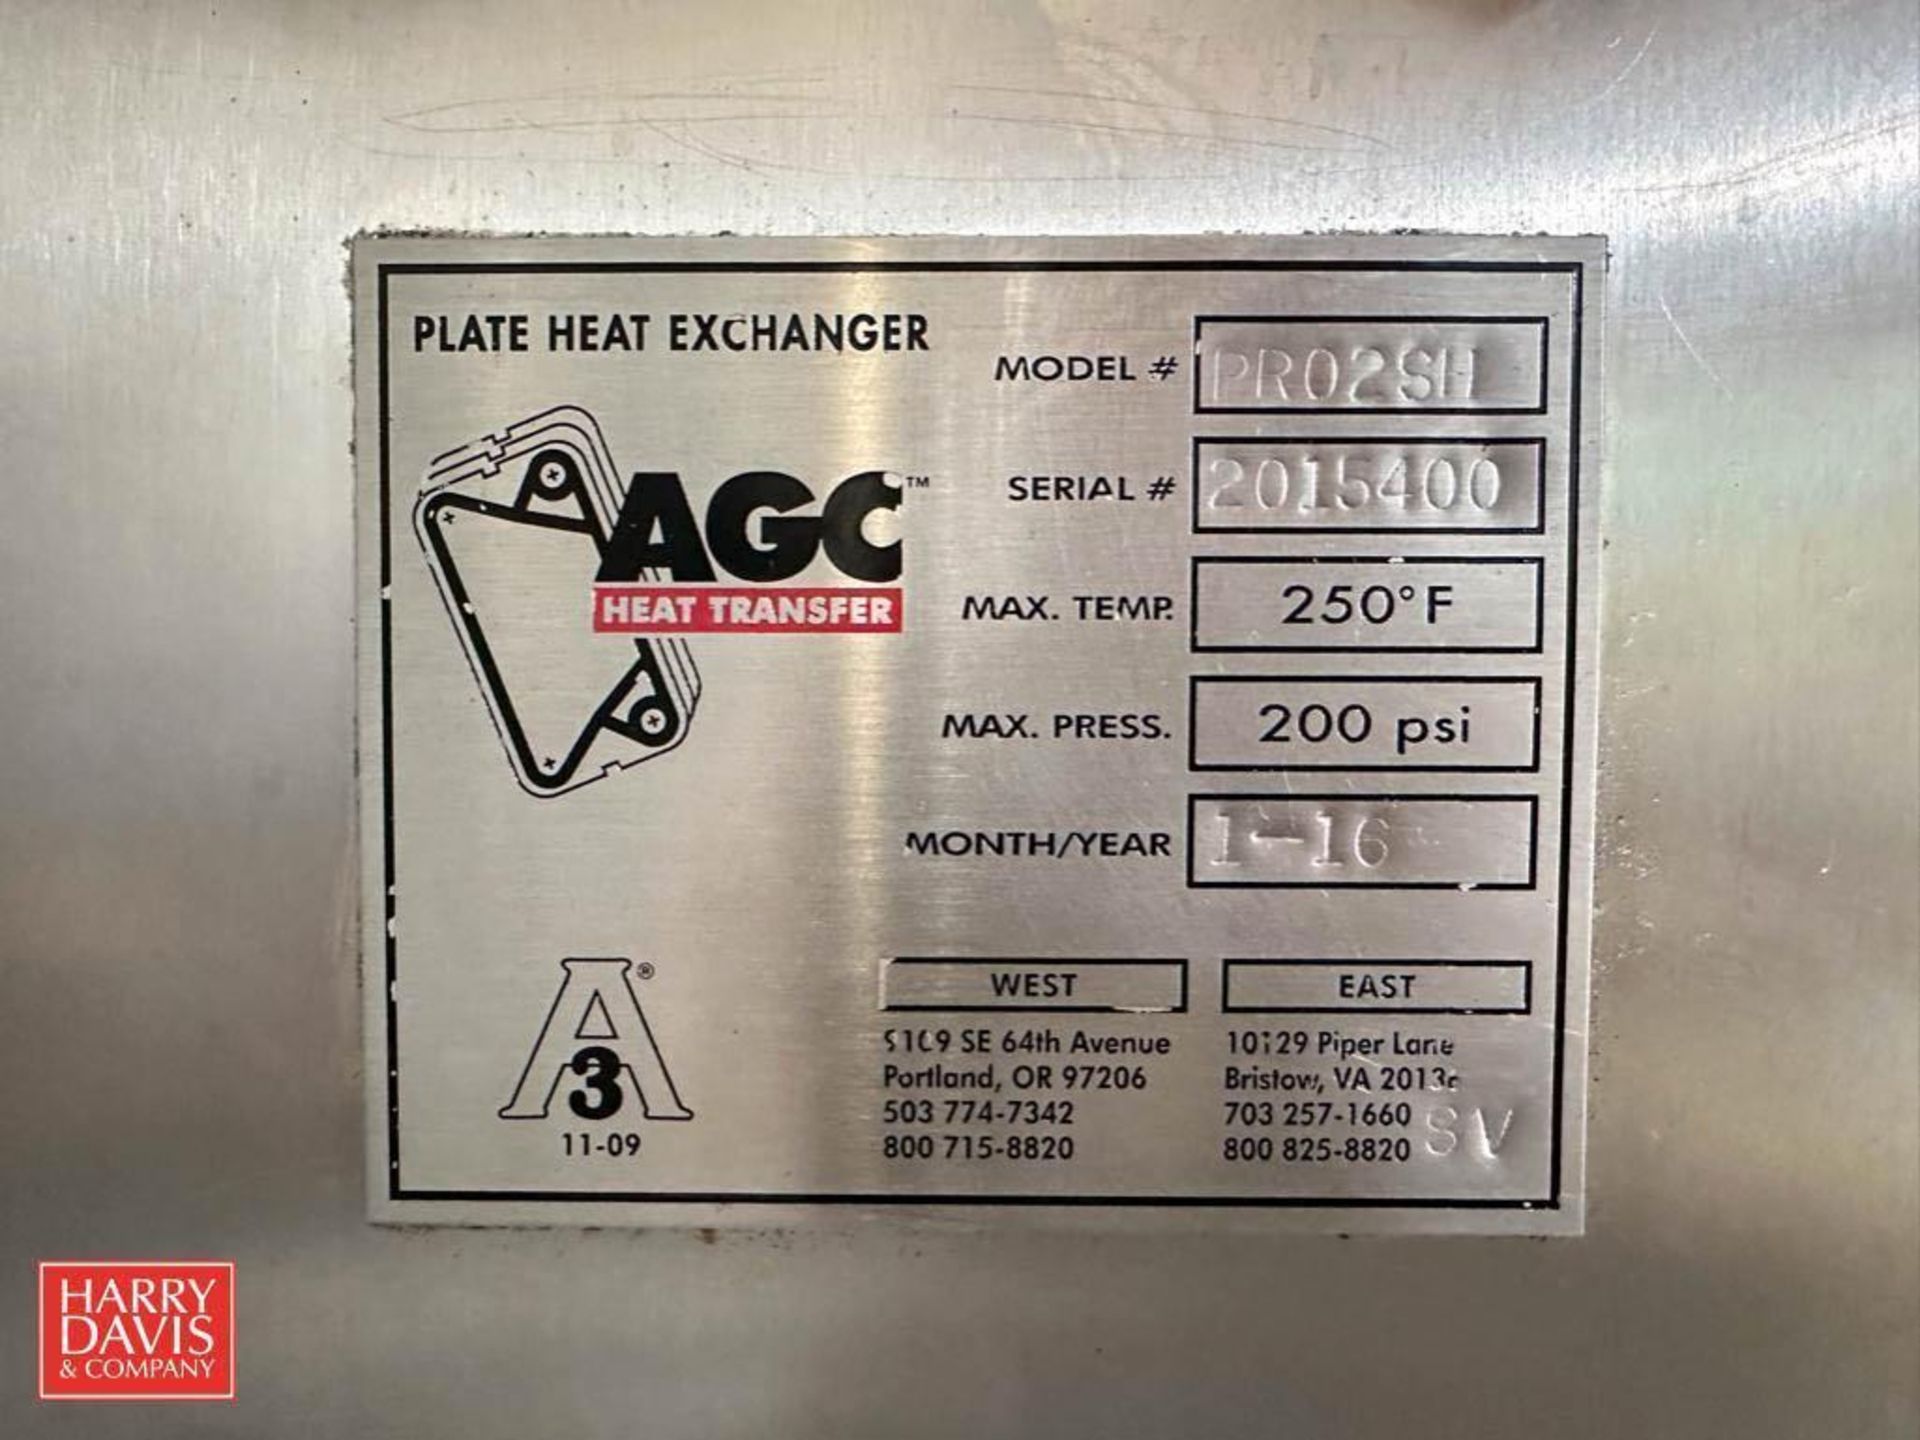 2016 AGC S/S Plate Heat Exchanger, Model: PRO2SH, S/N: 2015400 - Rigging Fee: $300 - Image 2 of 2